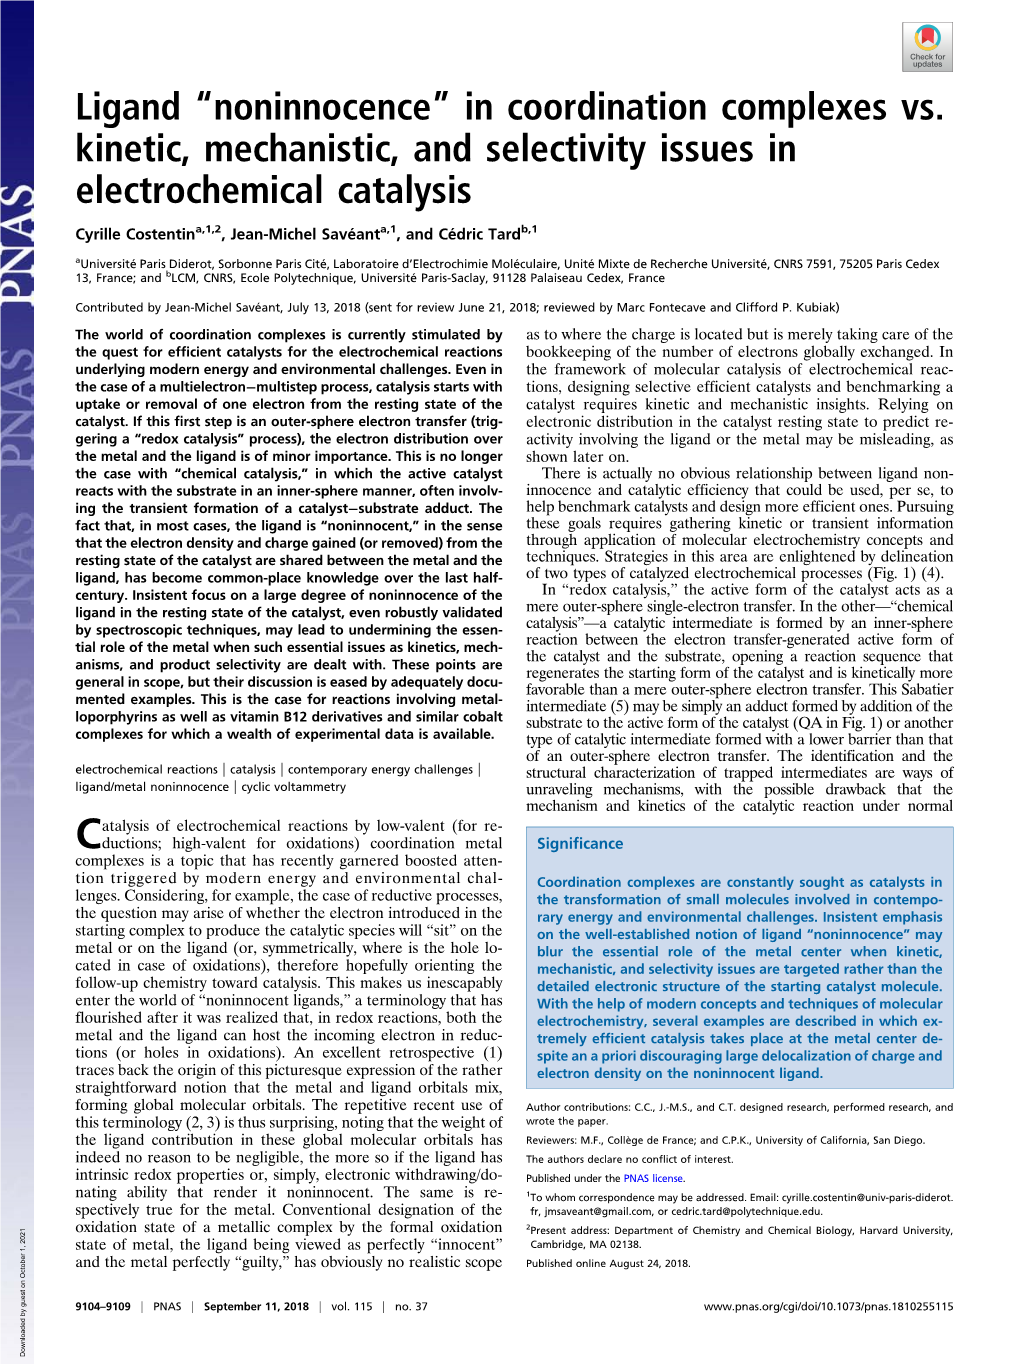 Ligand “Noninnocence” in Coordination Complexes Vs. Kinetic, Mechanistic, and Selectivity Issues in Electrochemical Catalysis